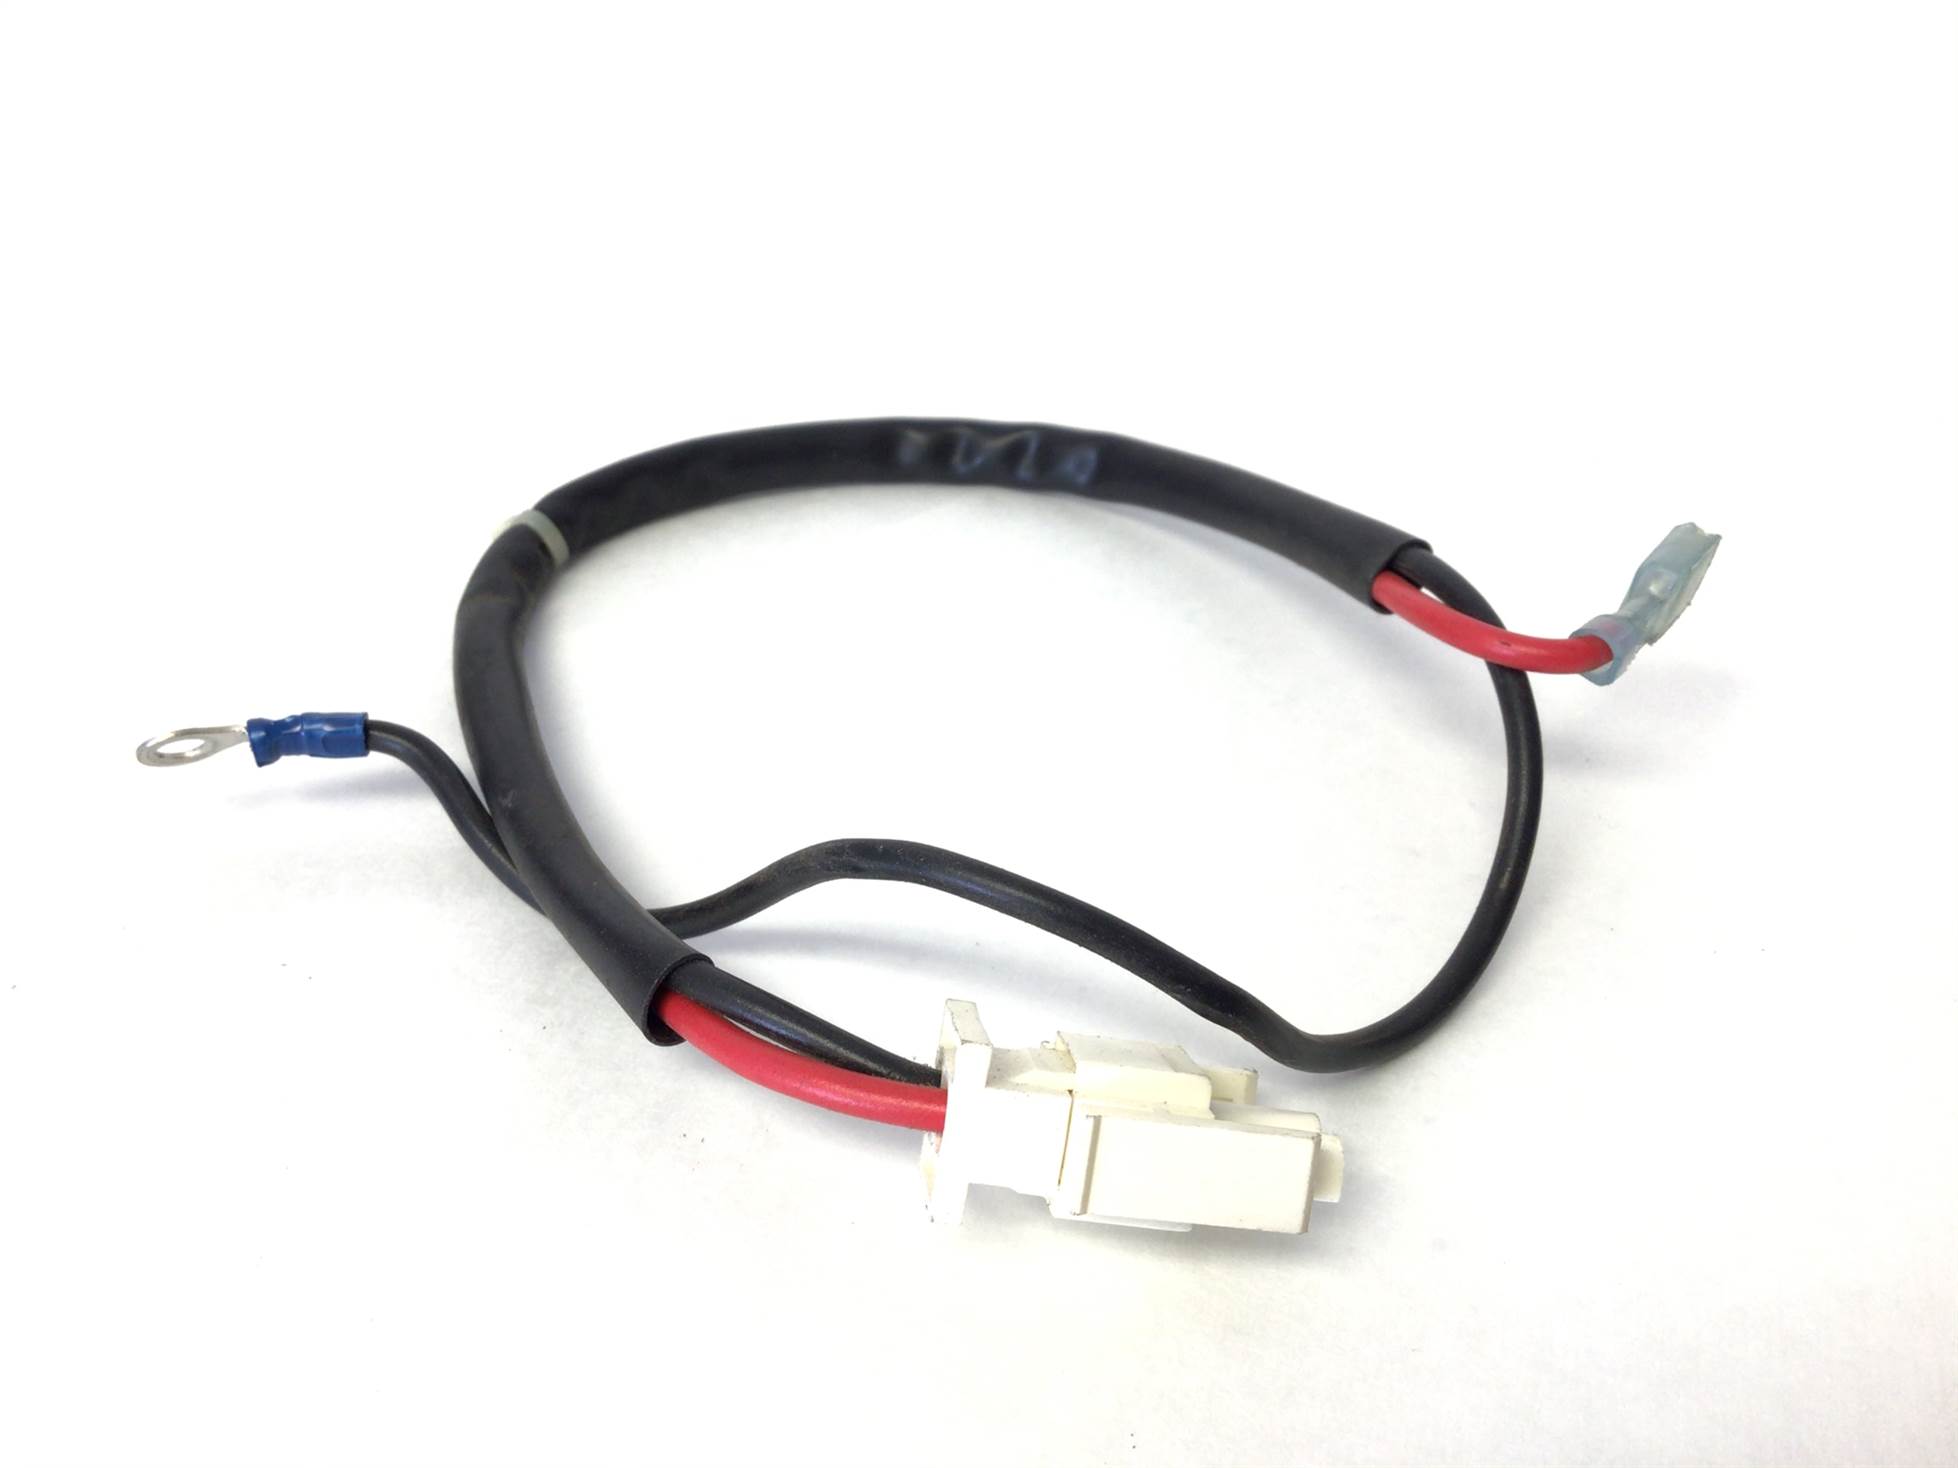 Motor Wire Harness Black Red - White Connector